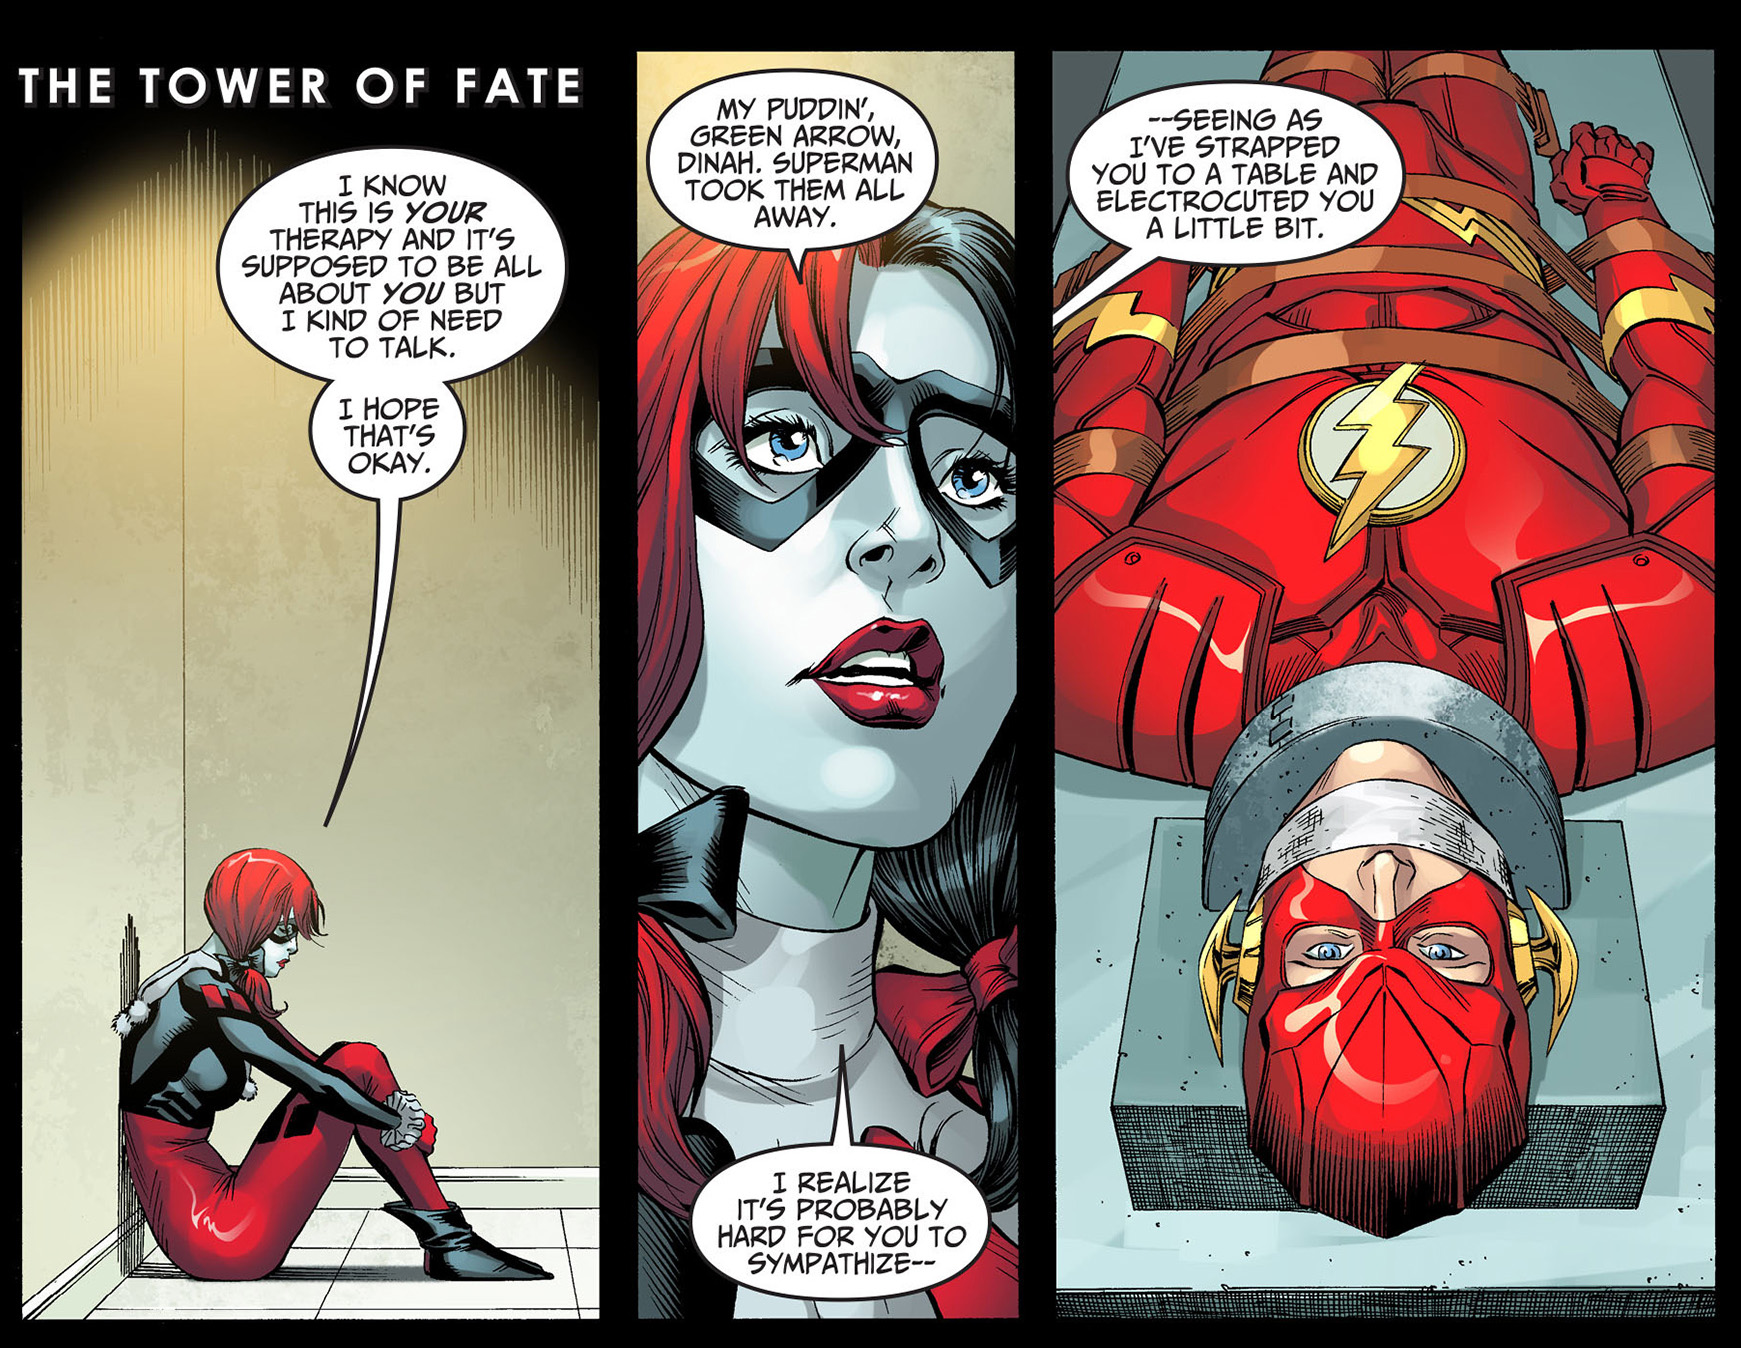 harley quinn tries to bond with the flash